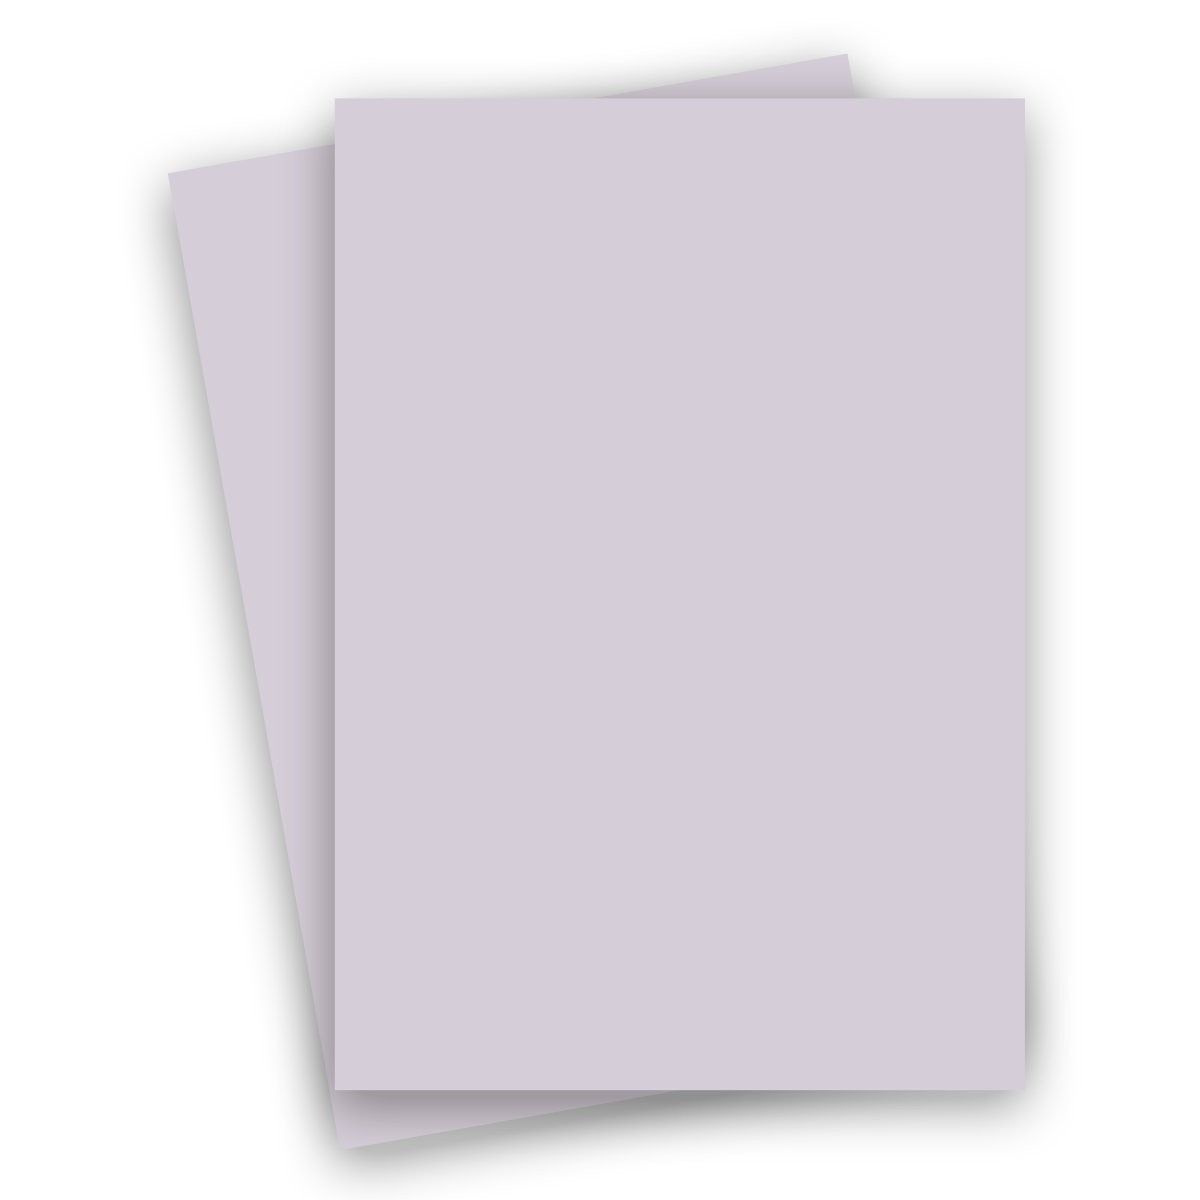 Burano PINK (10) - 12X12 Cardstock Paper - 92lb Cover (250gsm